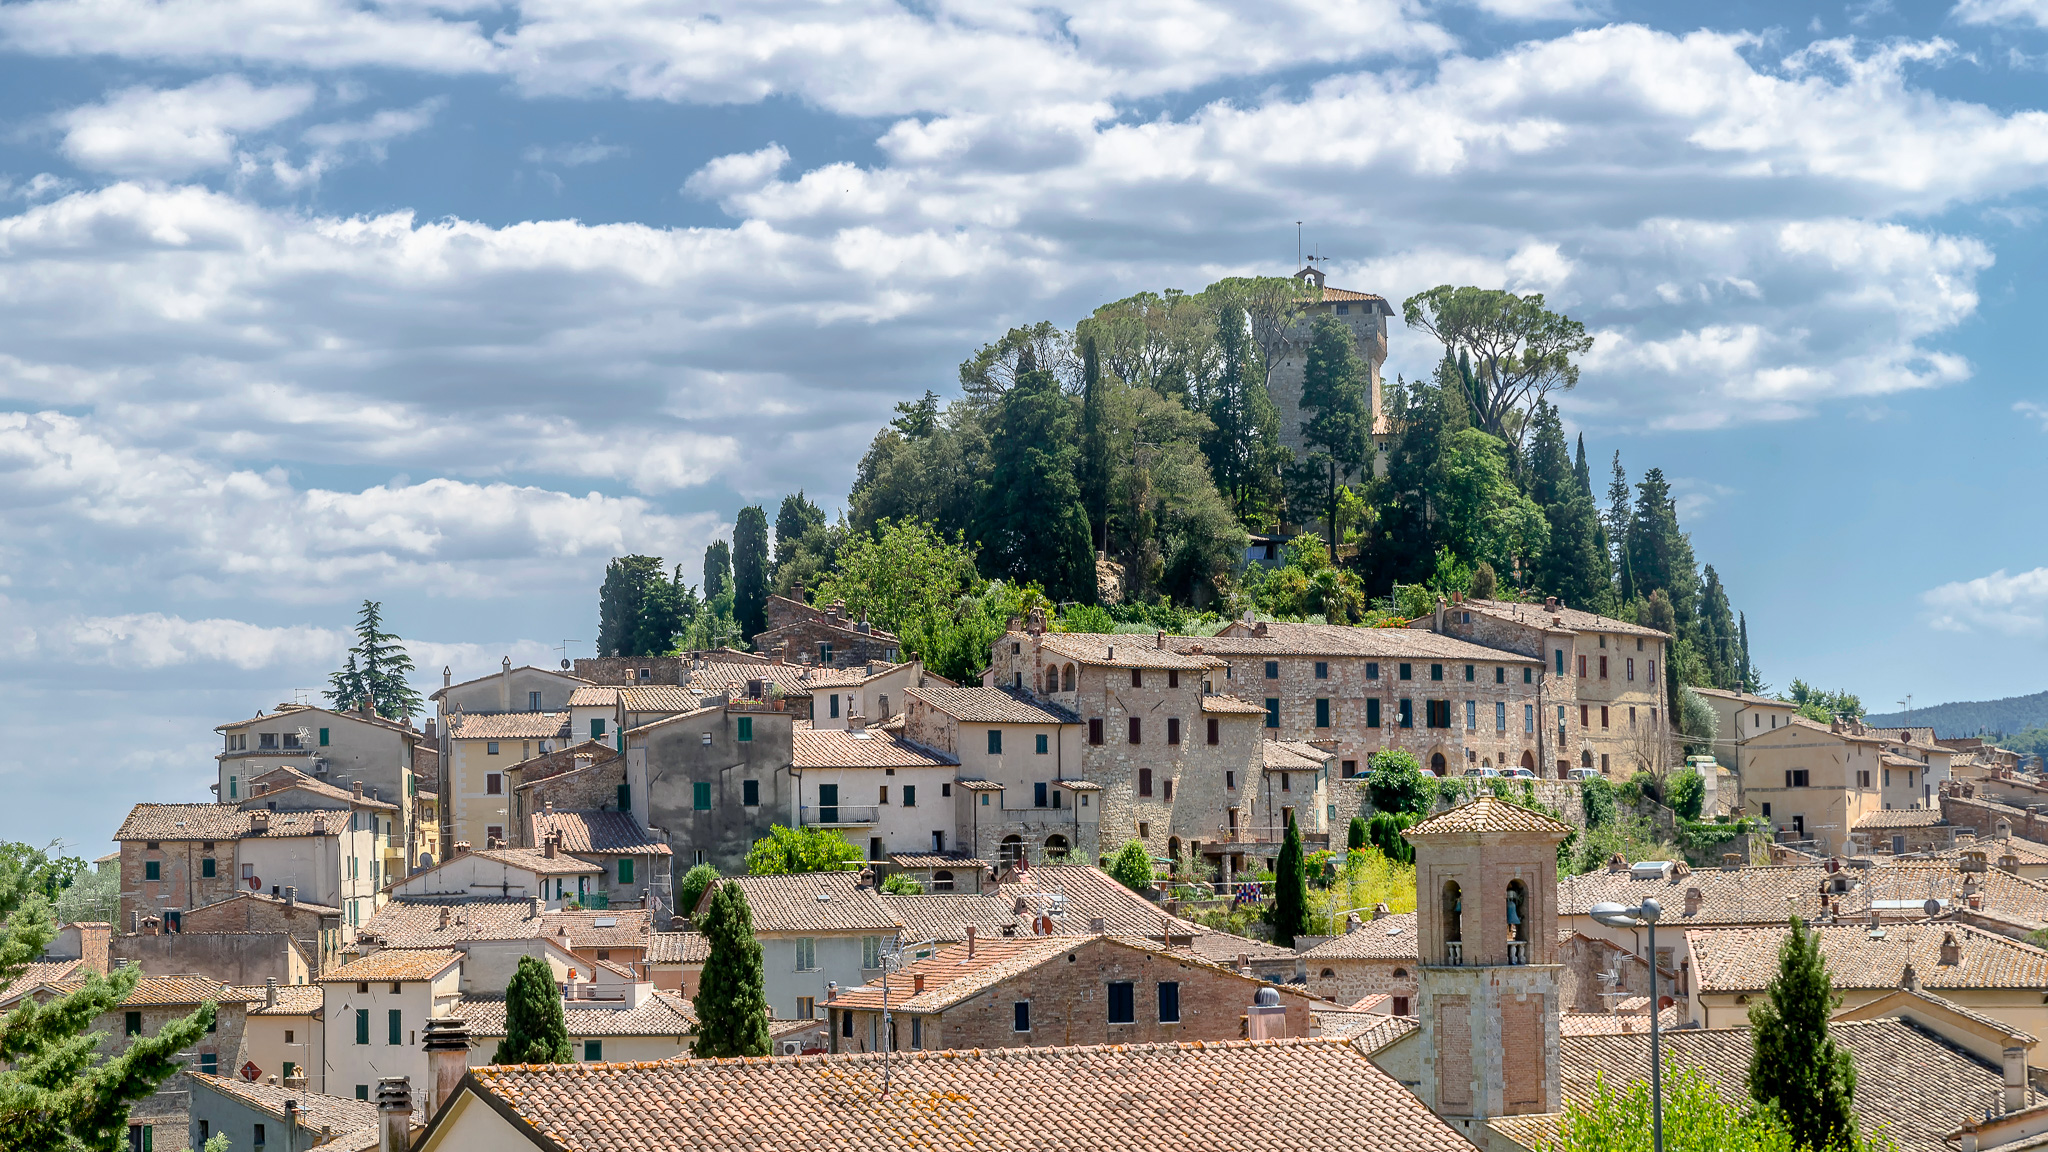 Magnificent view of the ancient hilltop village of Cetona, Siena